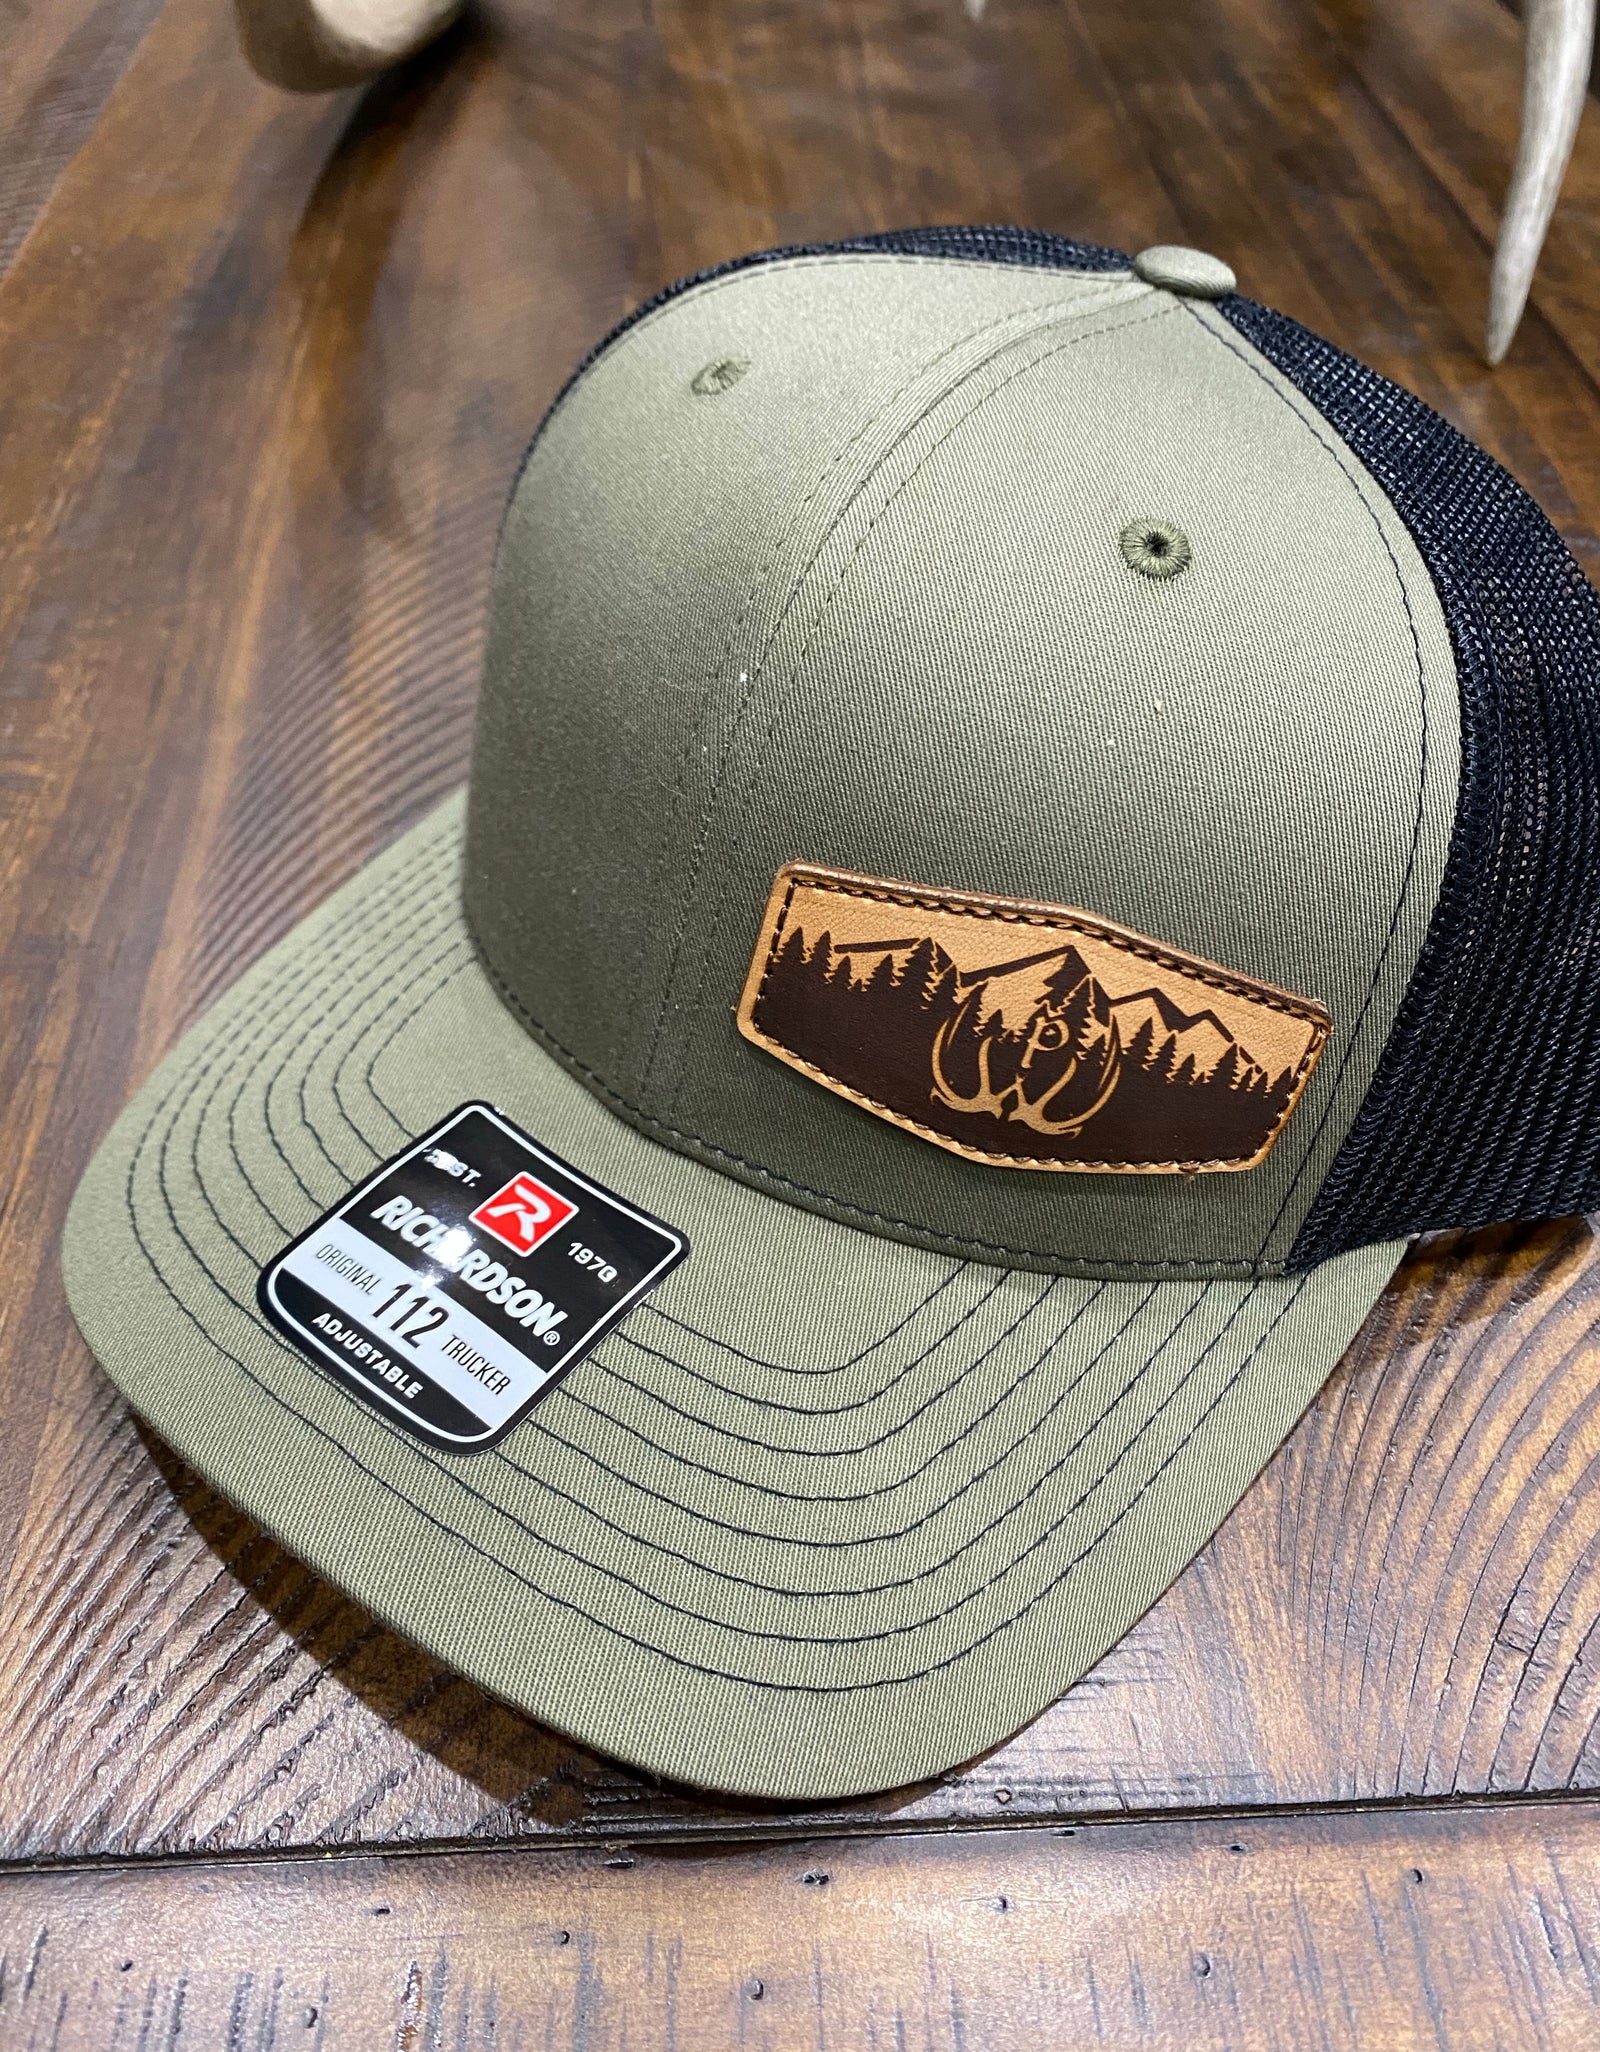 Hiker's Trail Tag Patches, Stickers, and Decals for RMNP • Rocky Mountain  Connection · Clothing · Gear